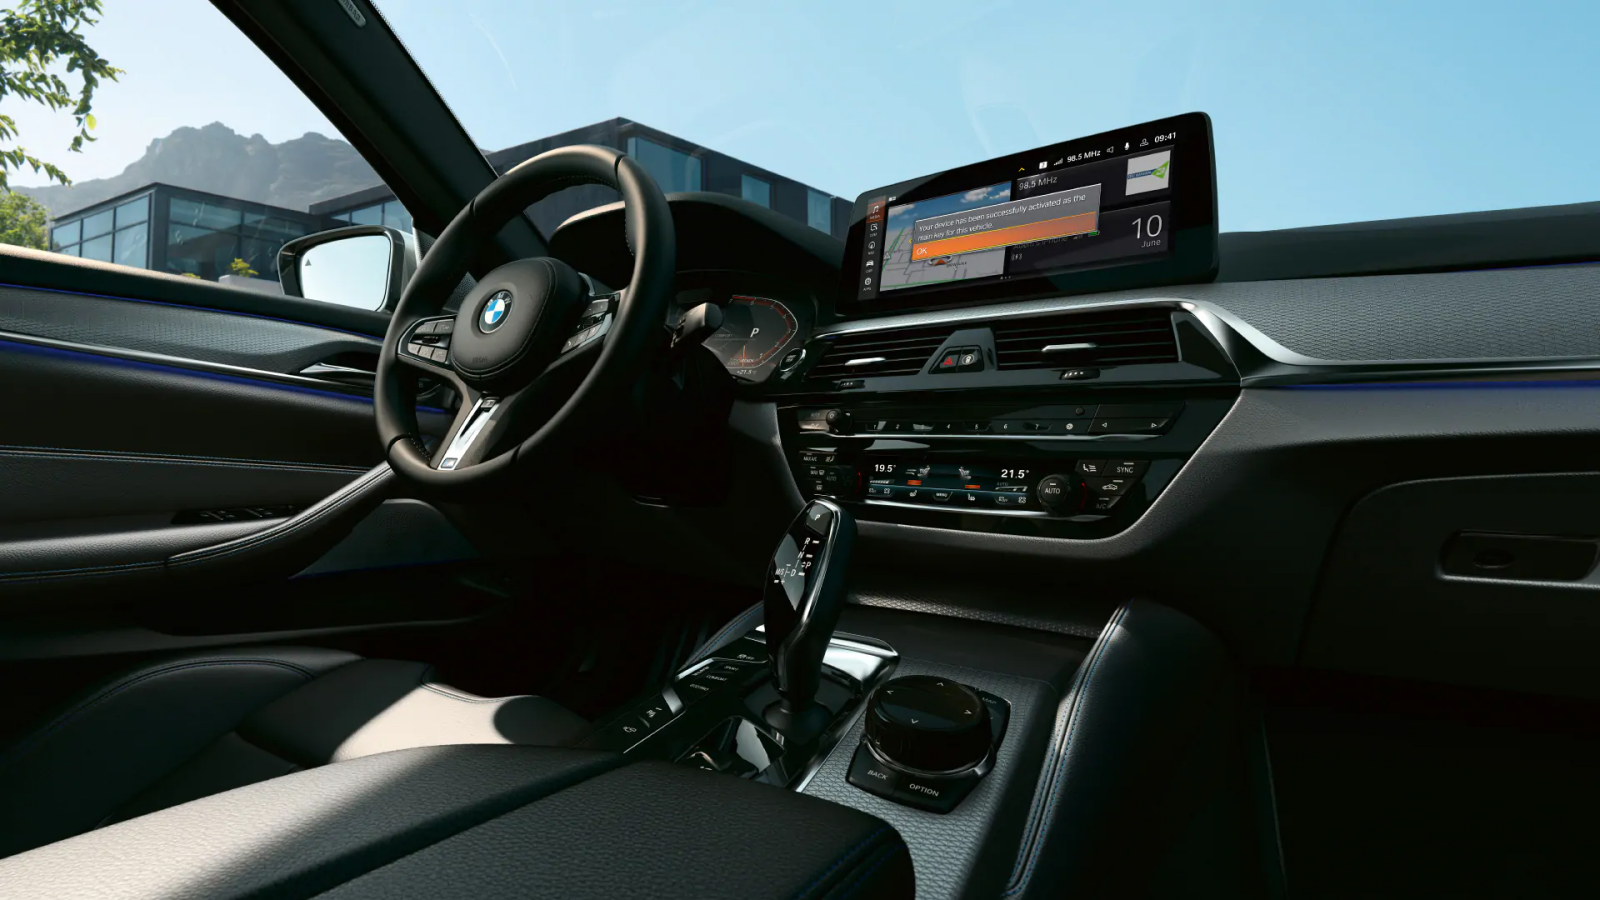 Now Apple devices can unlock your BMW via Digital Key!